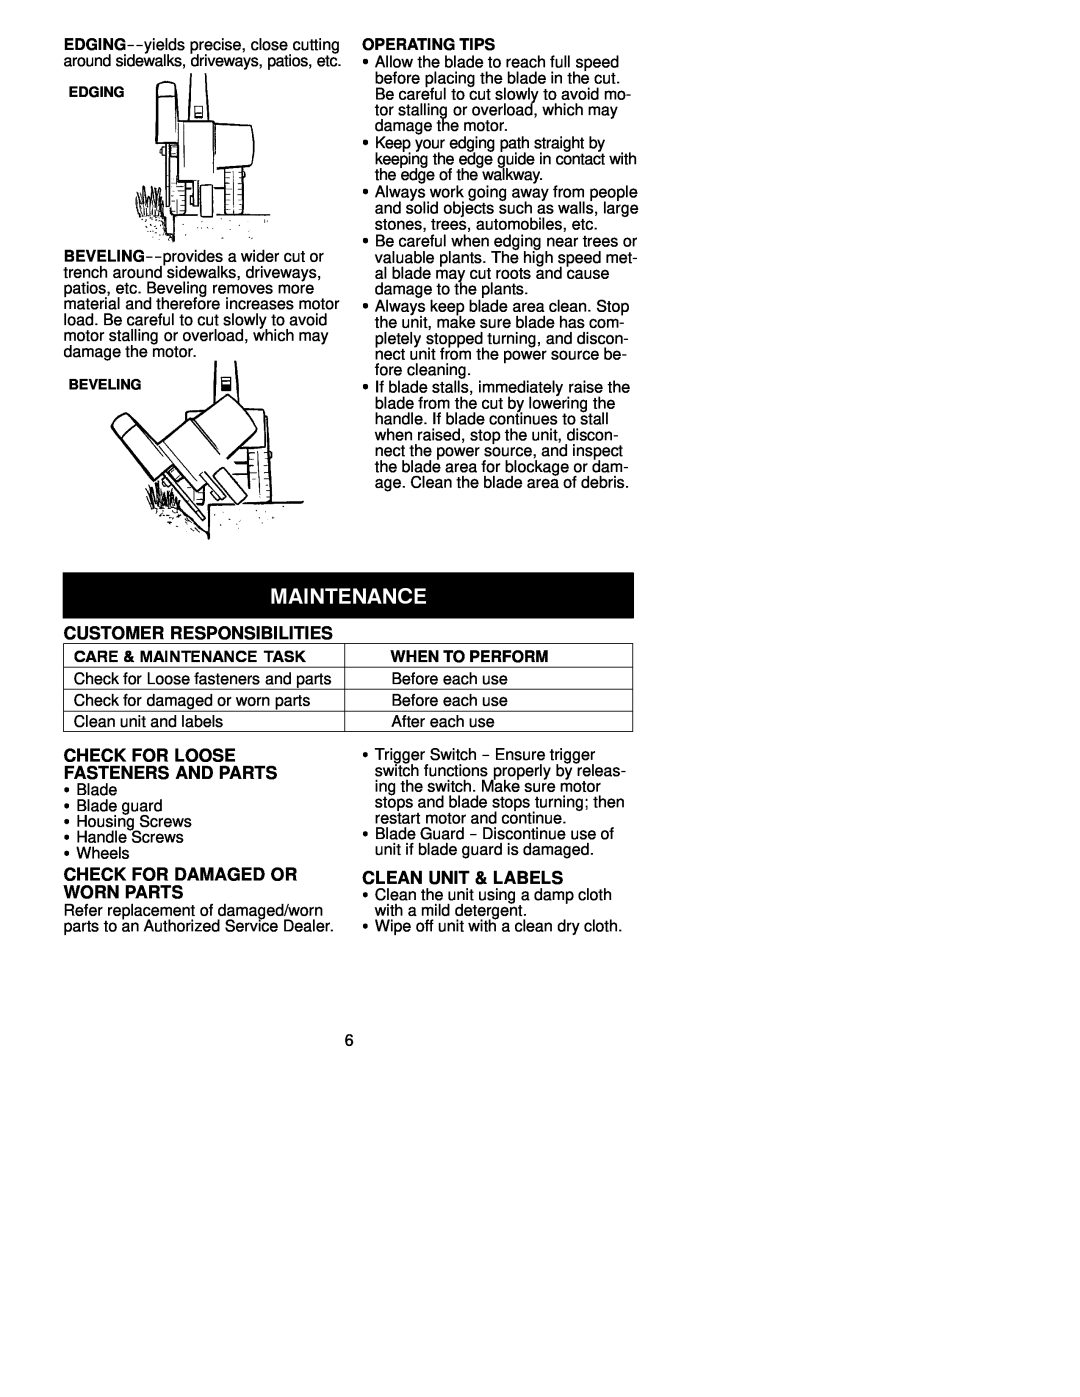 Poulan PE225 manual Customer Responsibilities, Check For Loose, Fasteners And Parts, Check For Damaged Or Worn Parts 